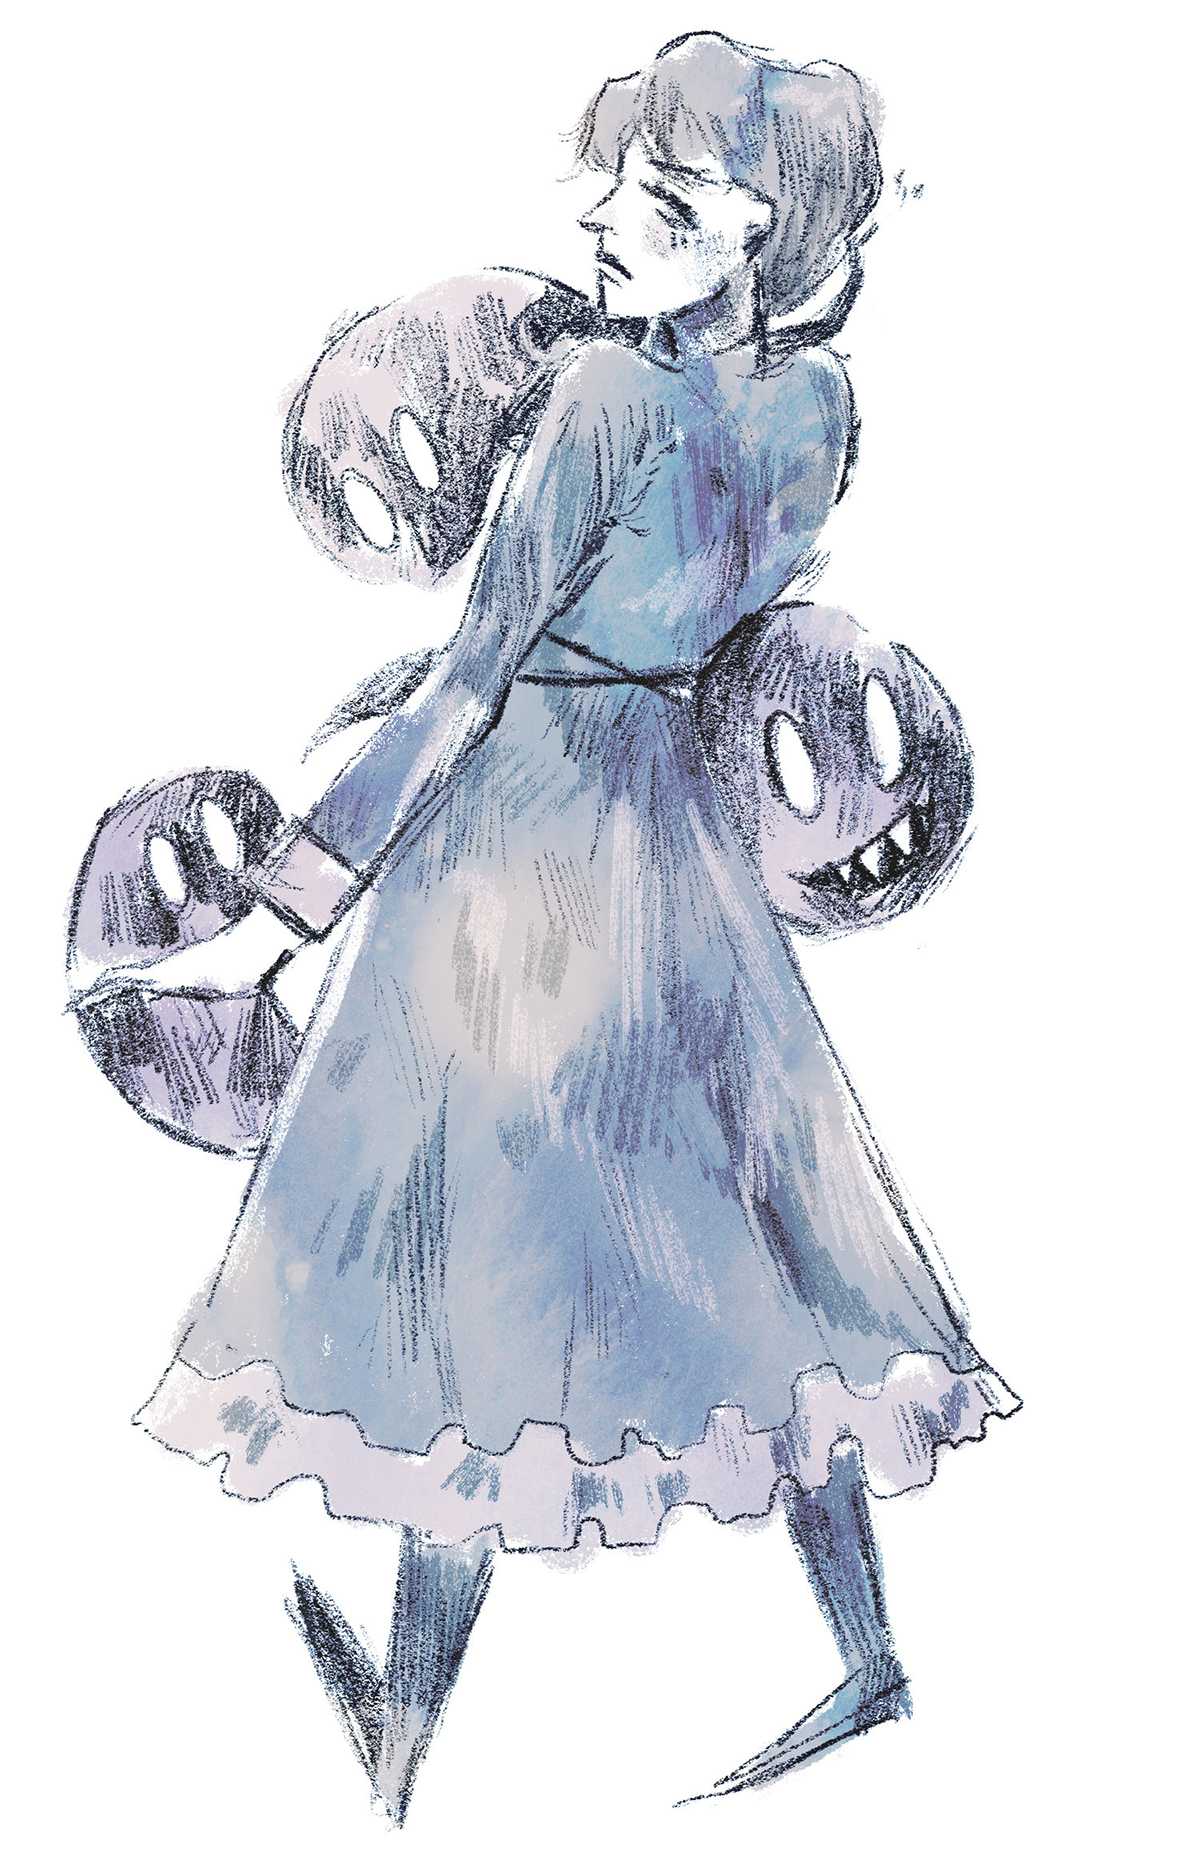 Pencil and watercolor sketch of woman in flowing dress walking with back to viewer, looking over her left shoulder with three shark toothed circular heads with vacant white eyes